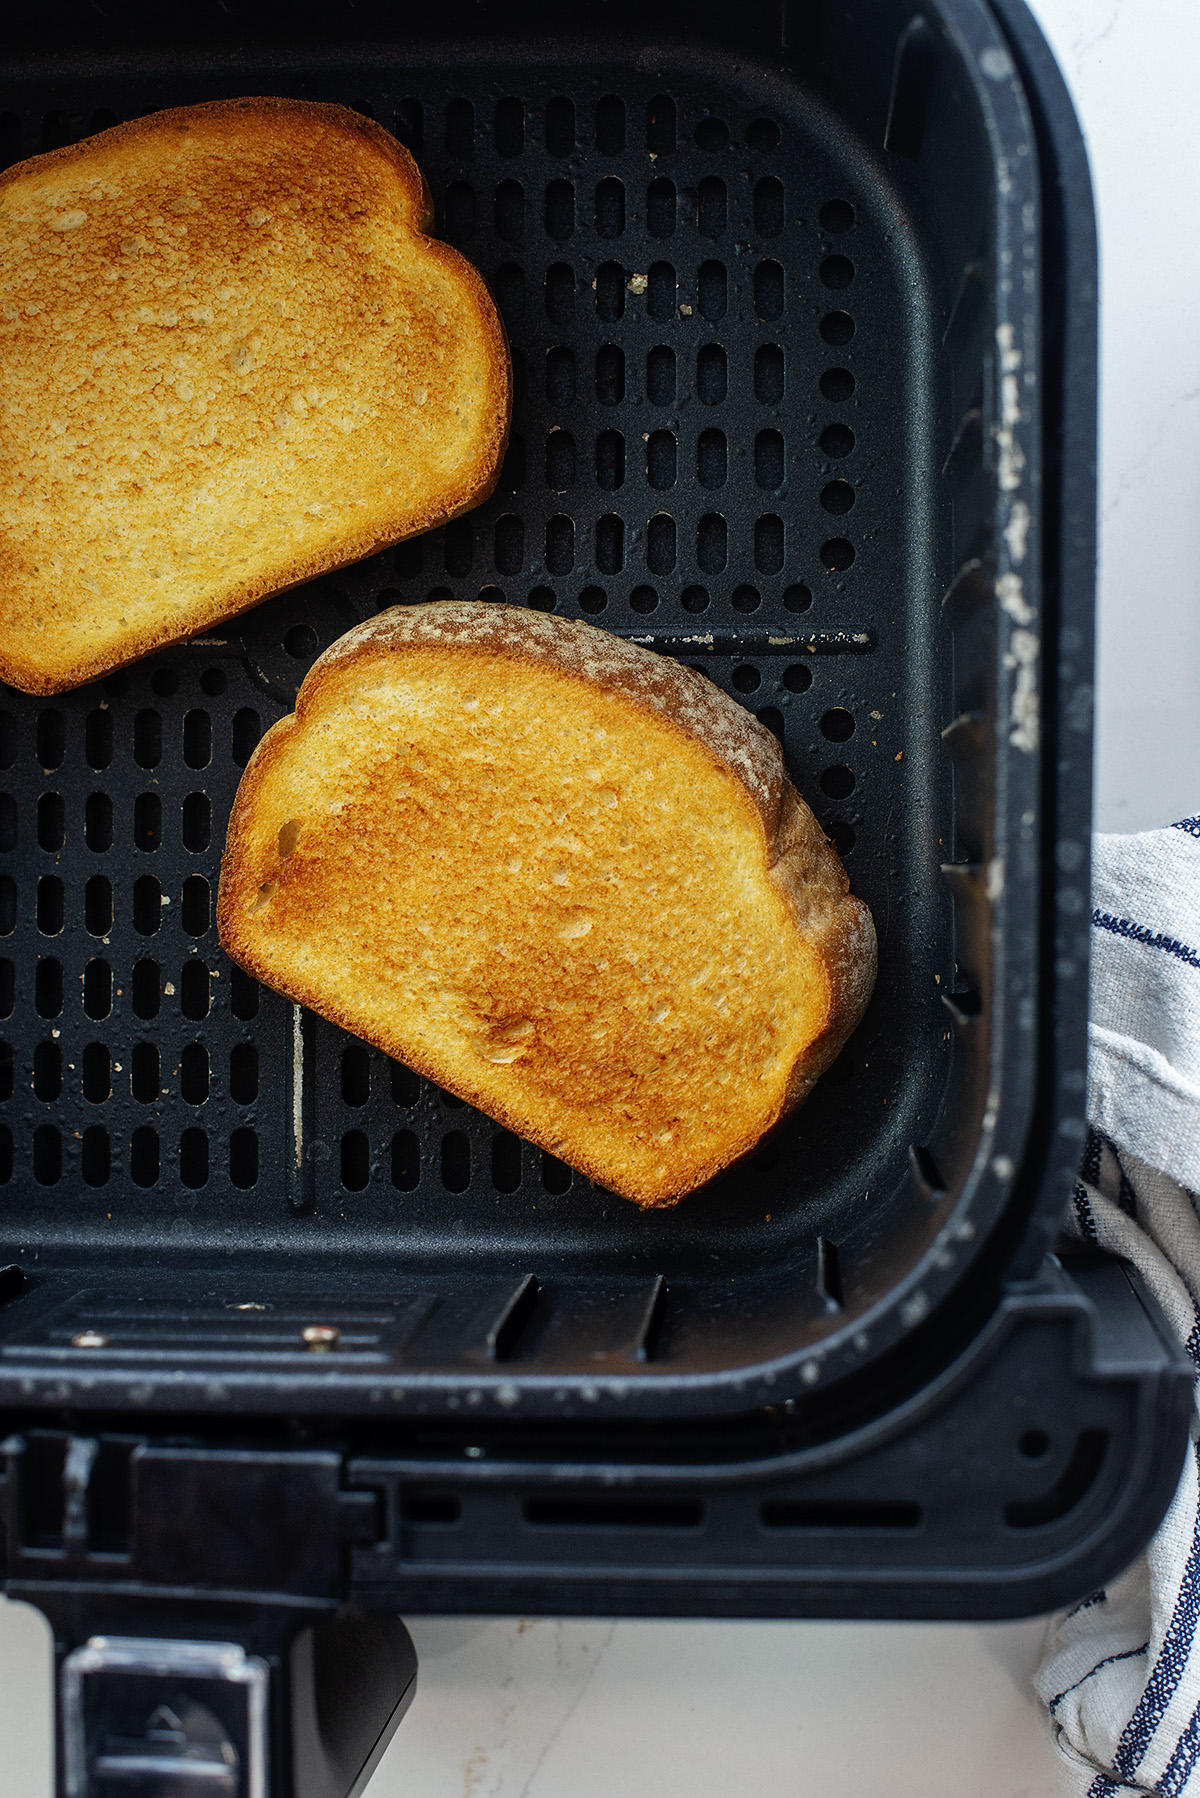 Two slices of toast in an air fryer basket.